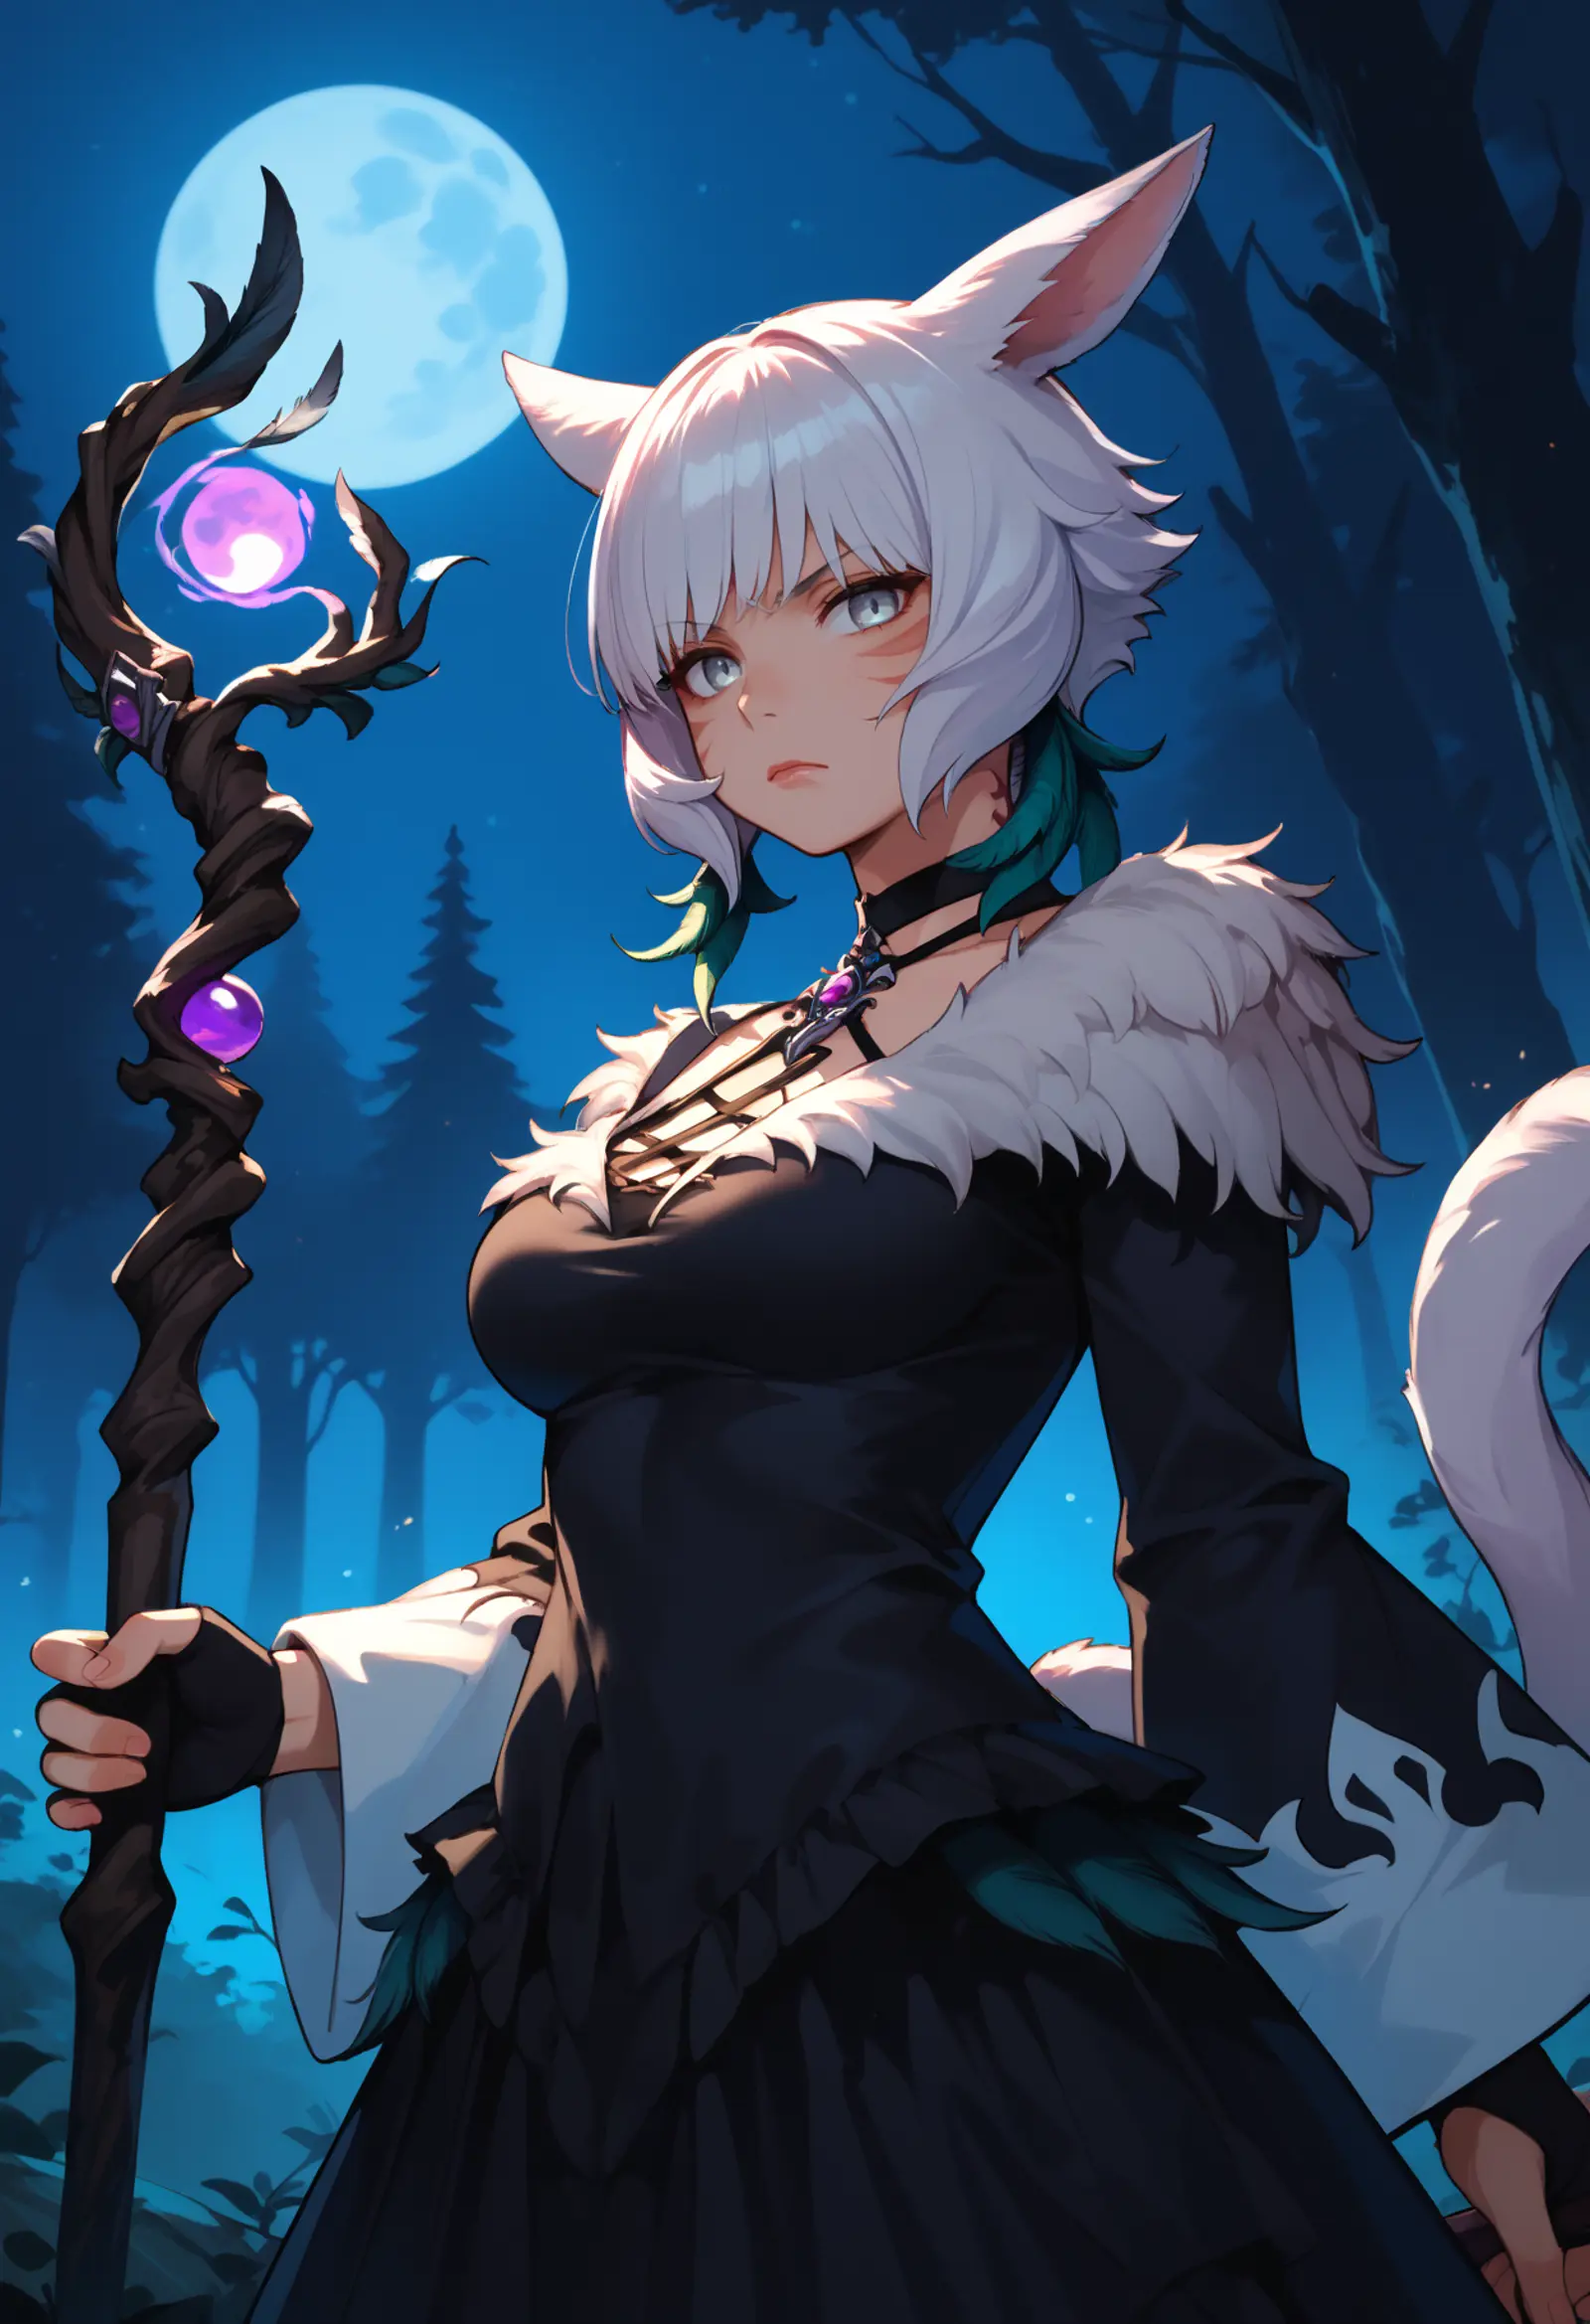 A woman with cat-like features standing in a moonlit forest. She is holding an ornate staff, topped with a glowing purple orb and adorned with smaller gems of the same color. Dressed in a dark, feathered outfit, she exudes an air of mystique. The full moon casts a soft glow on the forest and the character. 